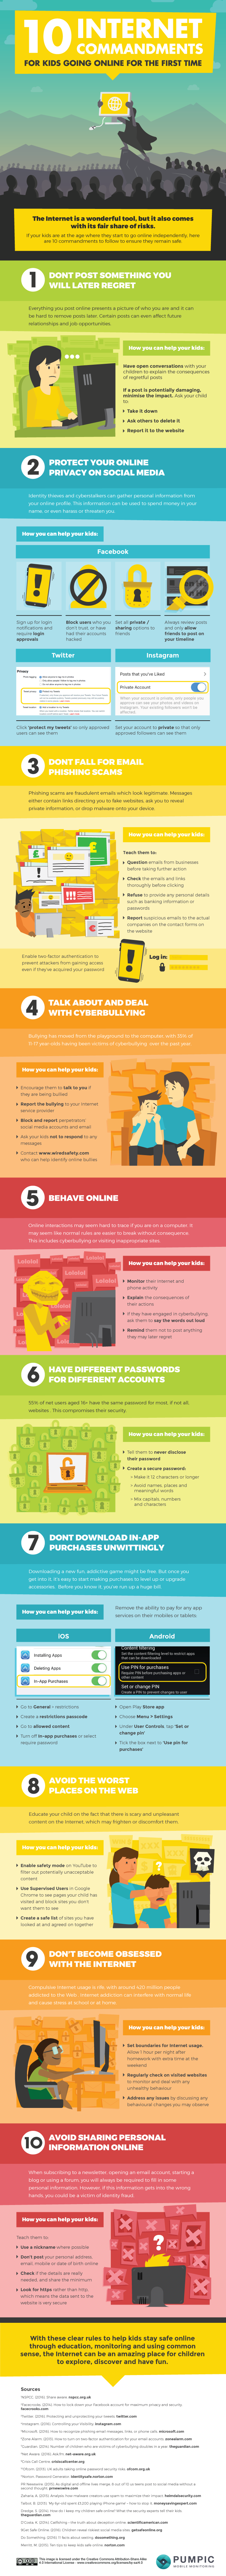 infographic of internet safety tips